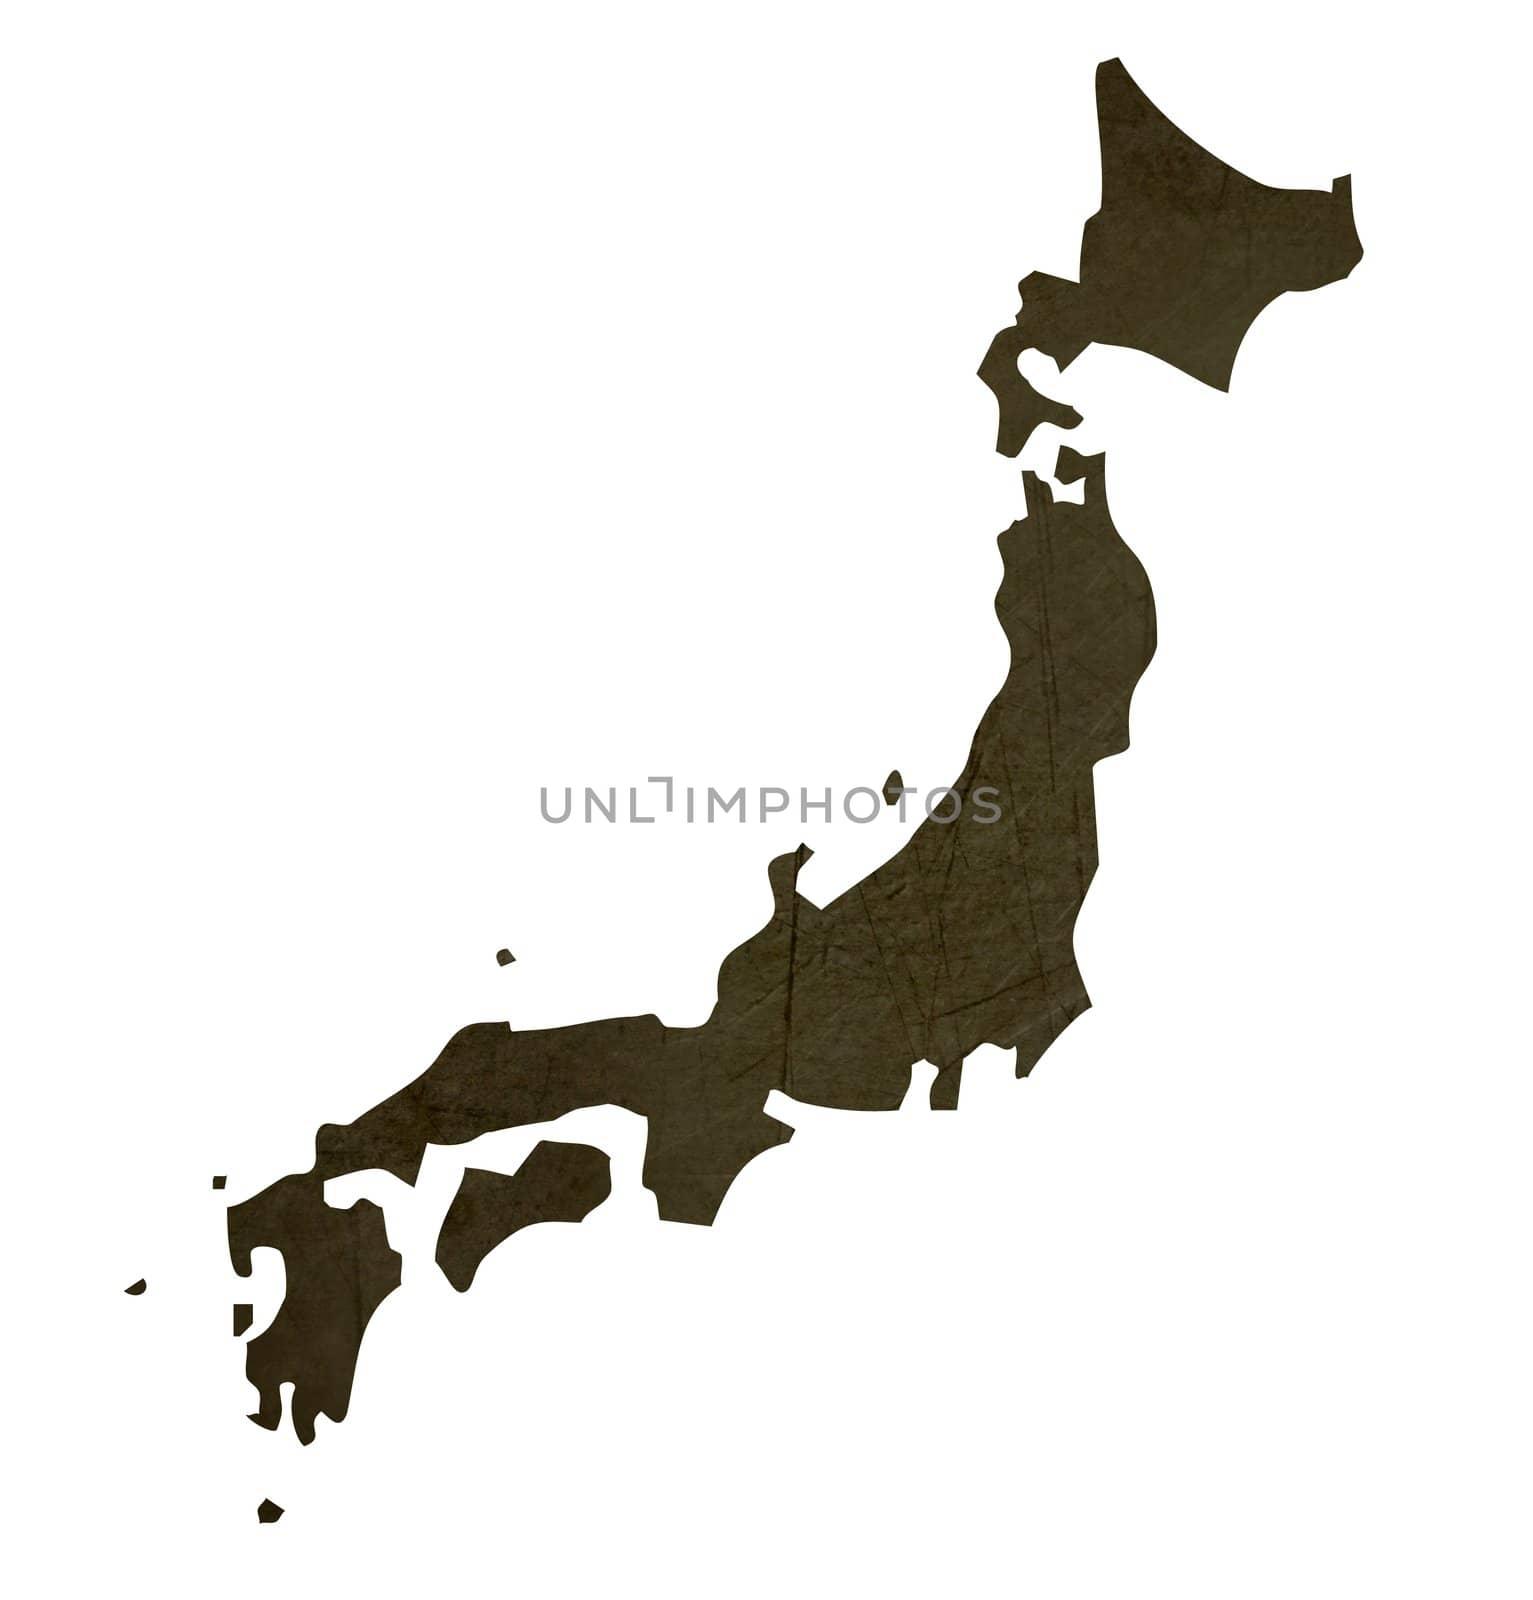 Dark silhouetted and textured map of Japan isolated on white background.